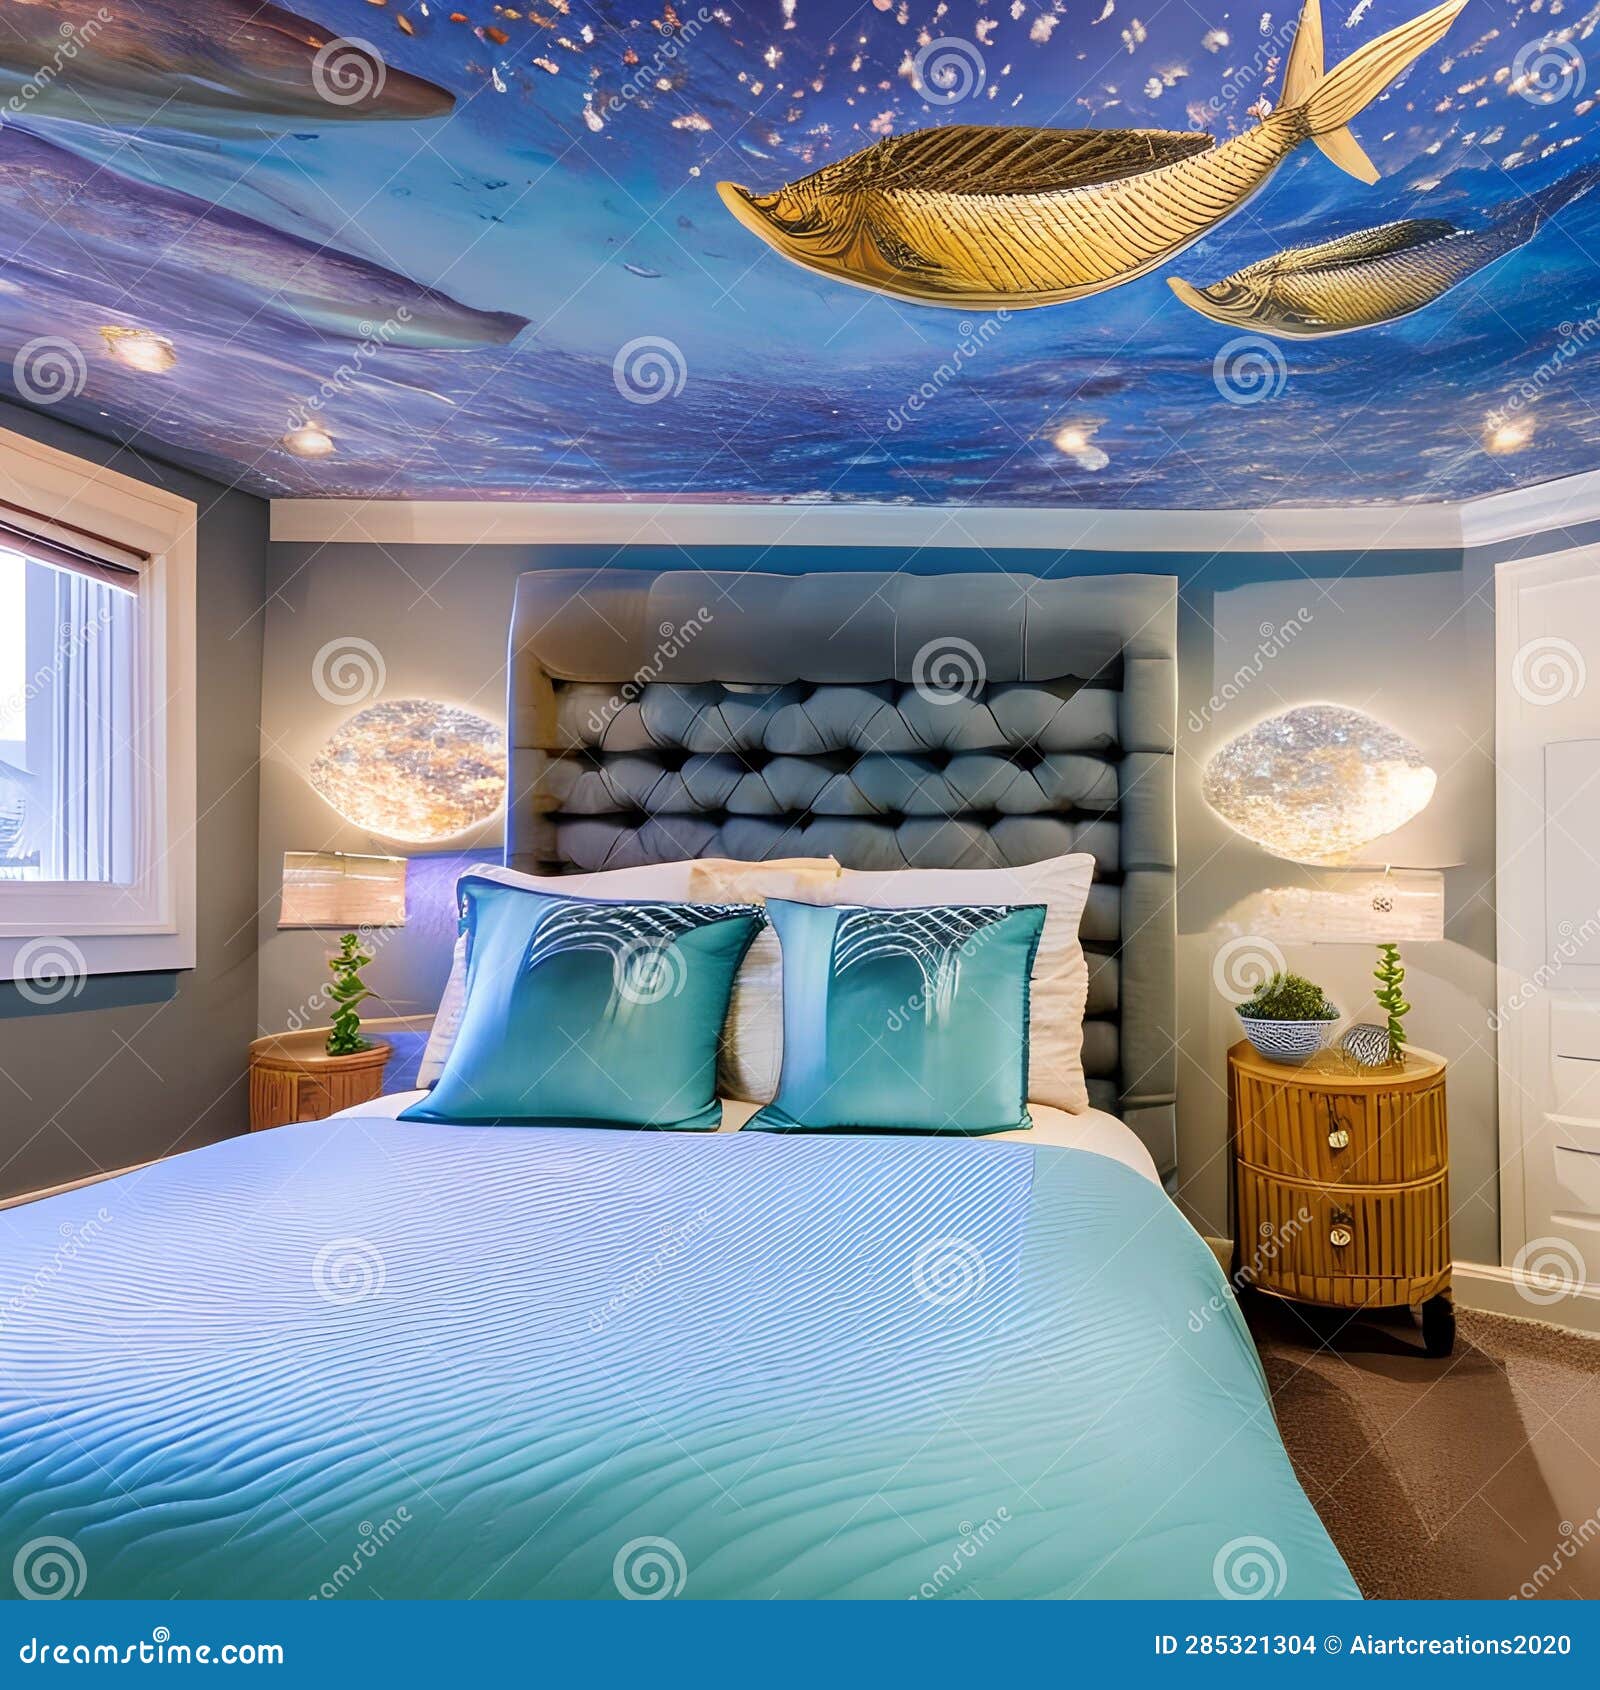 An Enchanted Underwater Mermaid-themed Bedroom with a Seashell Bed